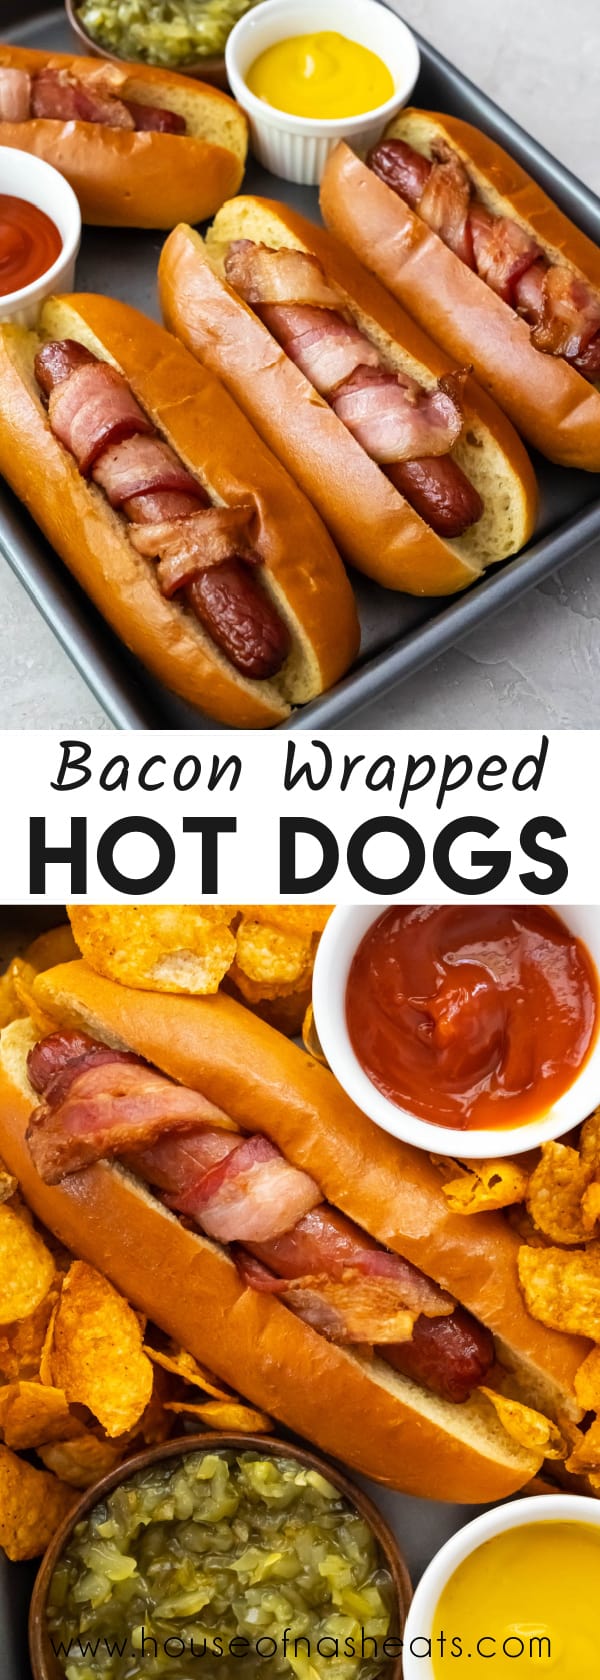 A collage of images of bacon wrapped hot dogs with text overlay.